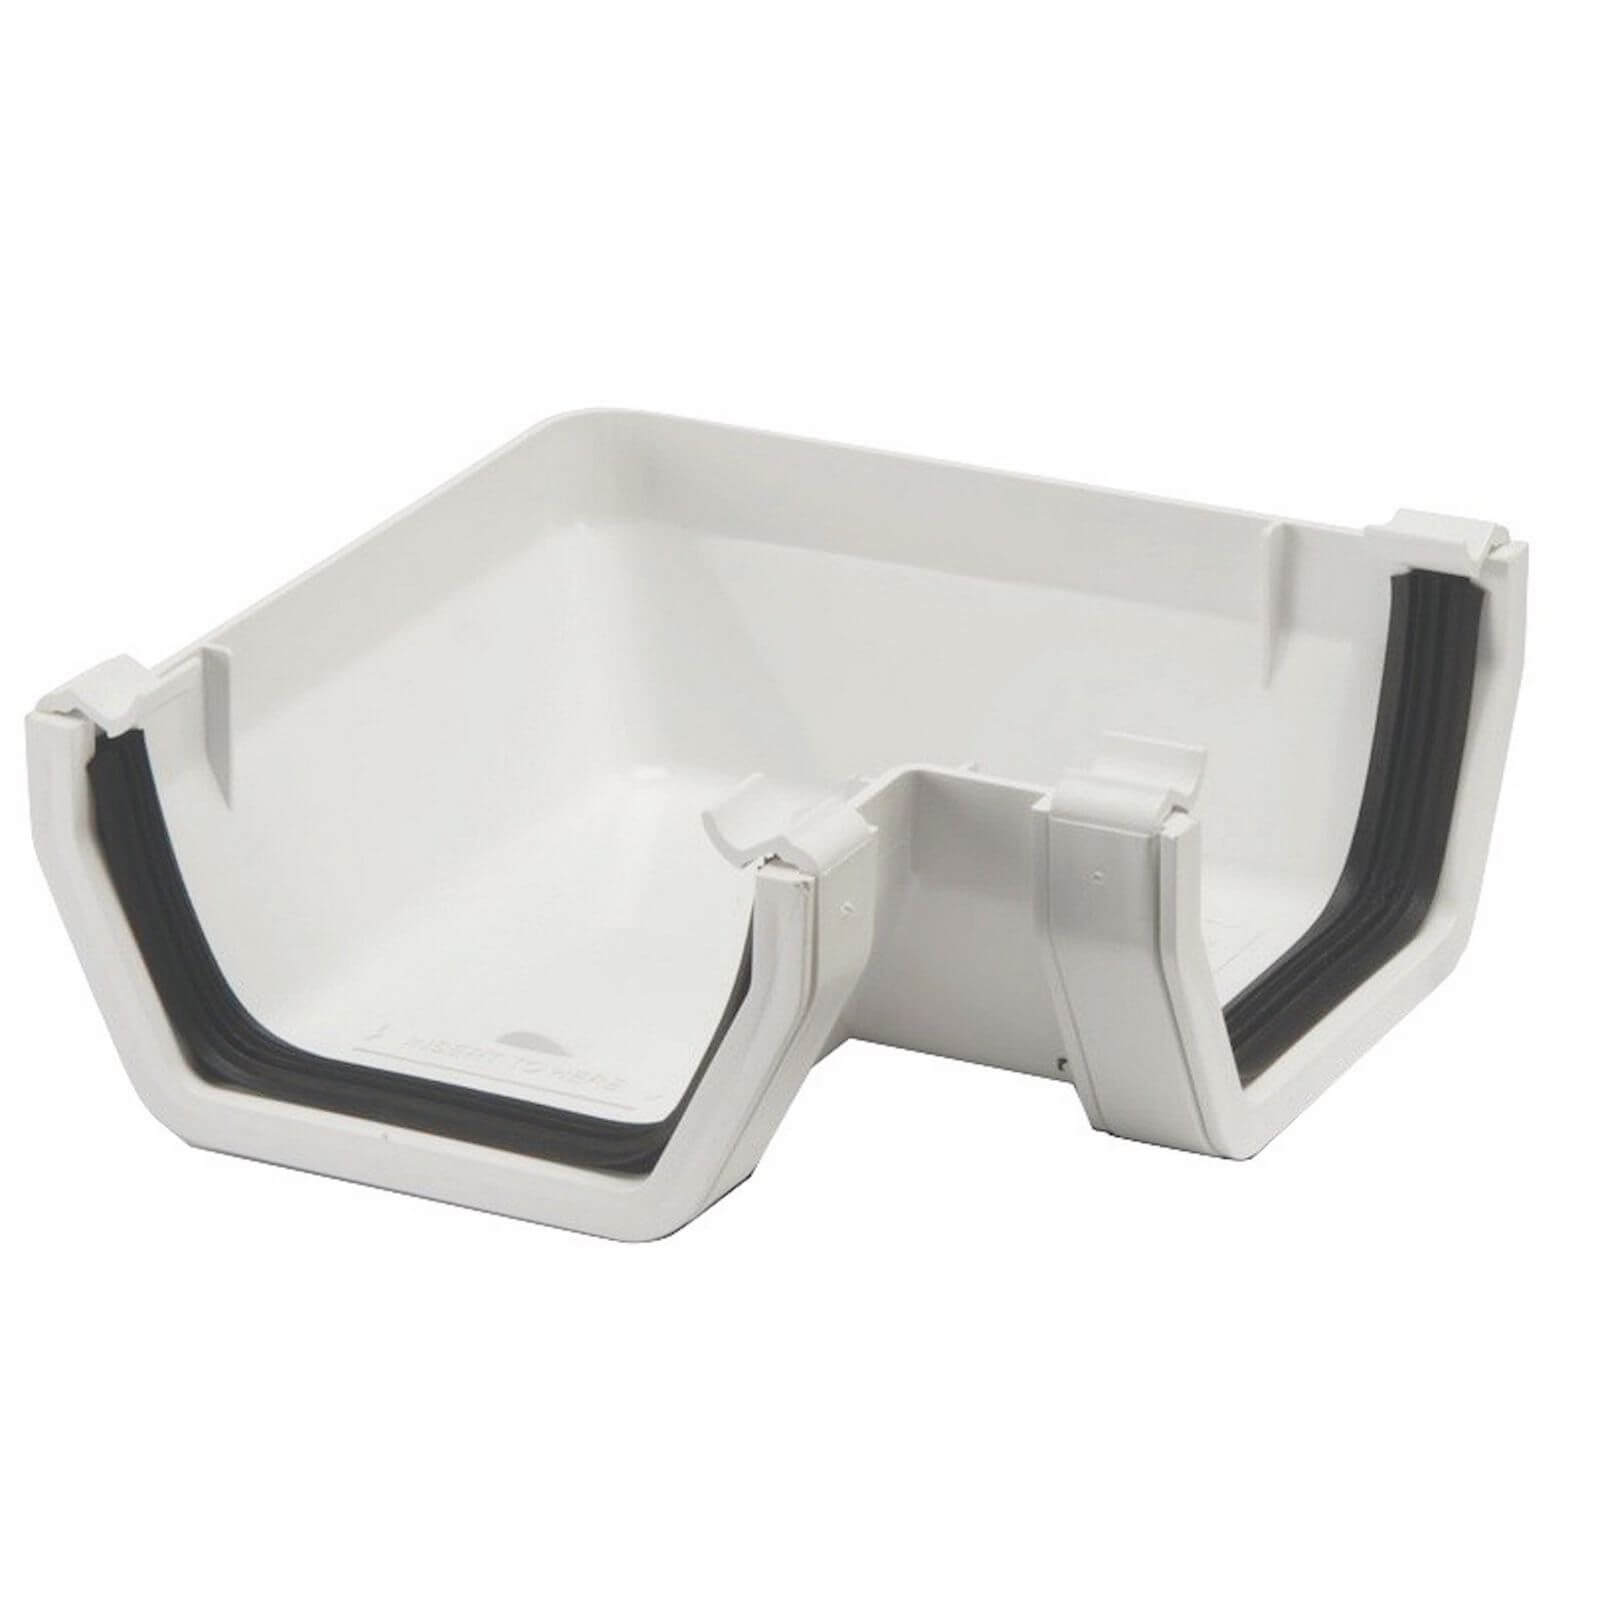 Photo of Polypipe Square Gutter Angle - 112mm X 90 Degree - White